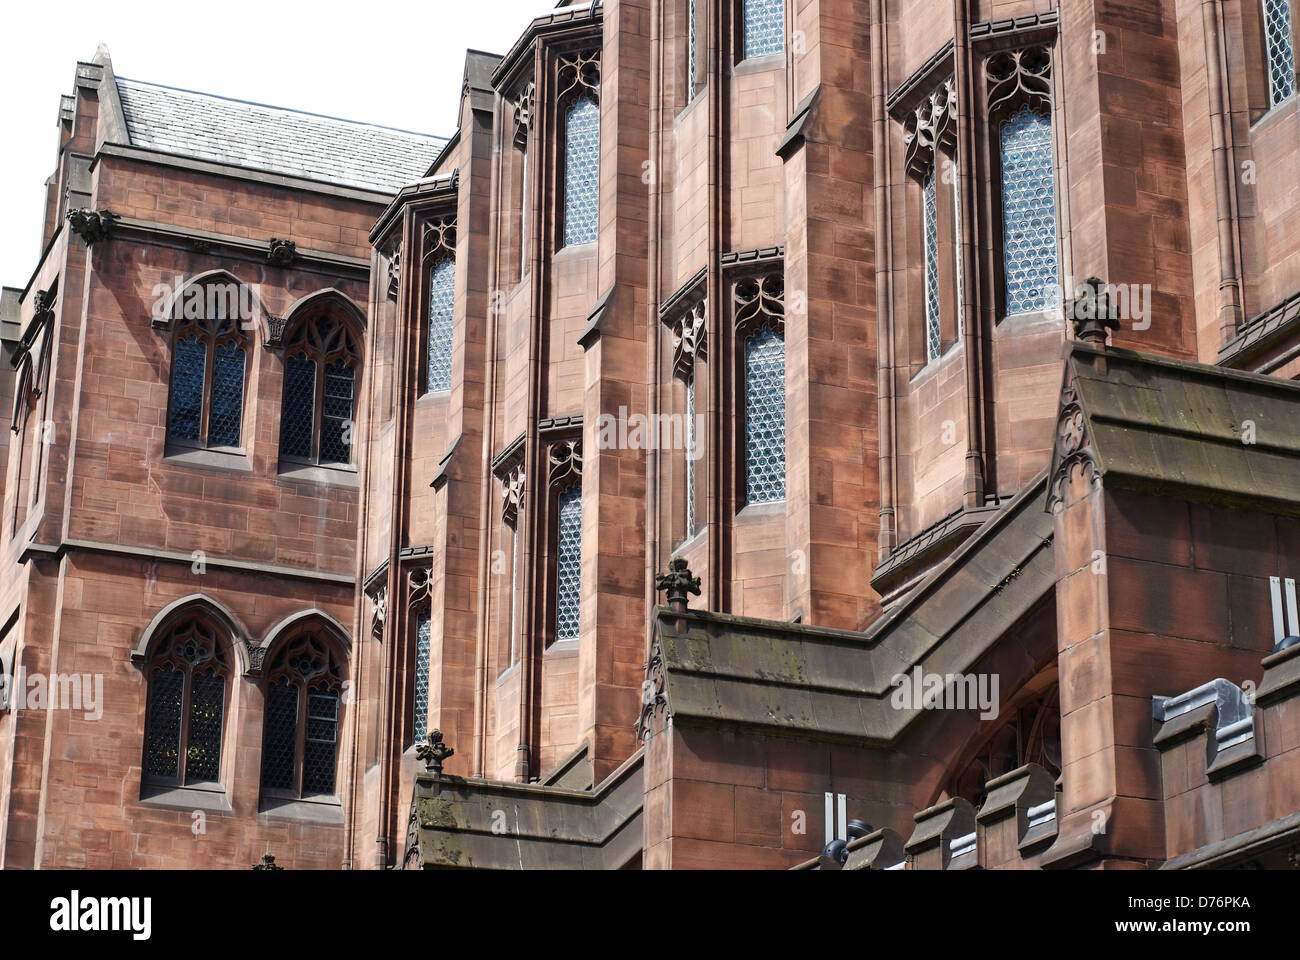 Internal view of John Rylands Library in Manchester. Stock Photo